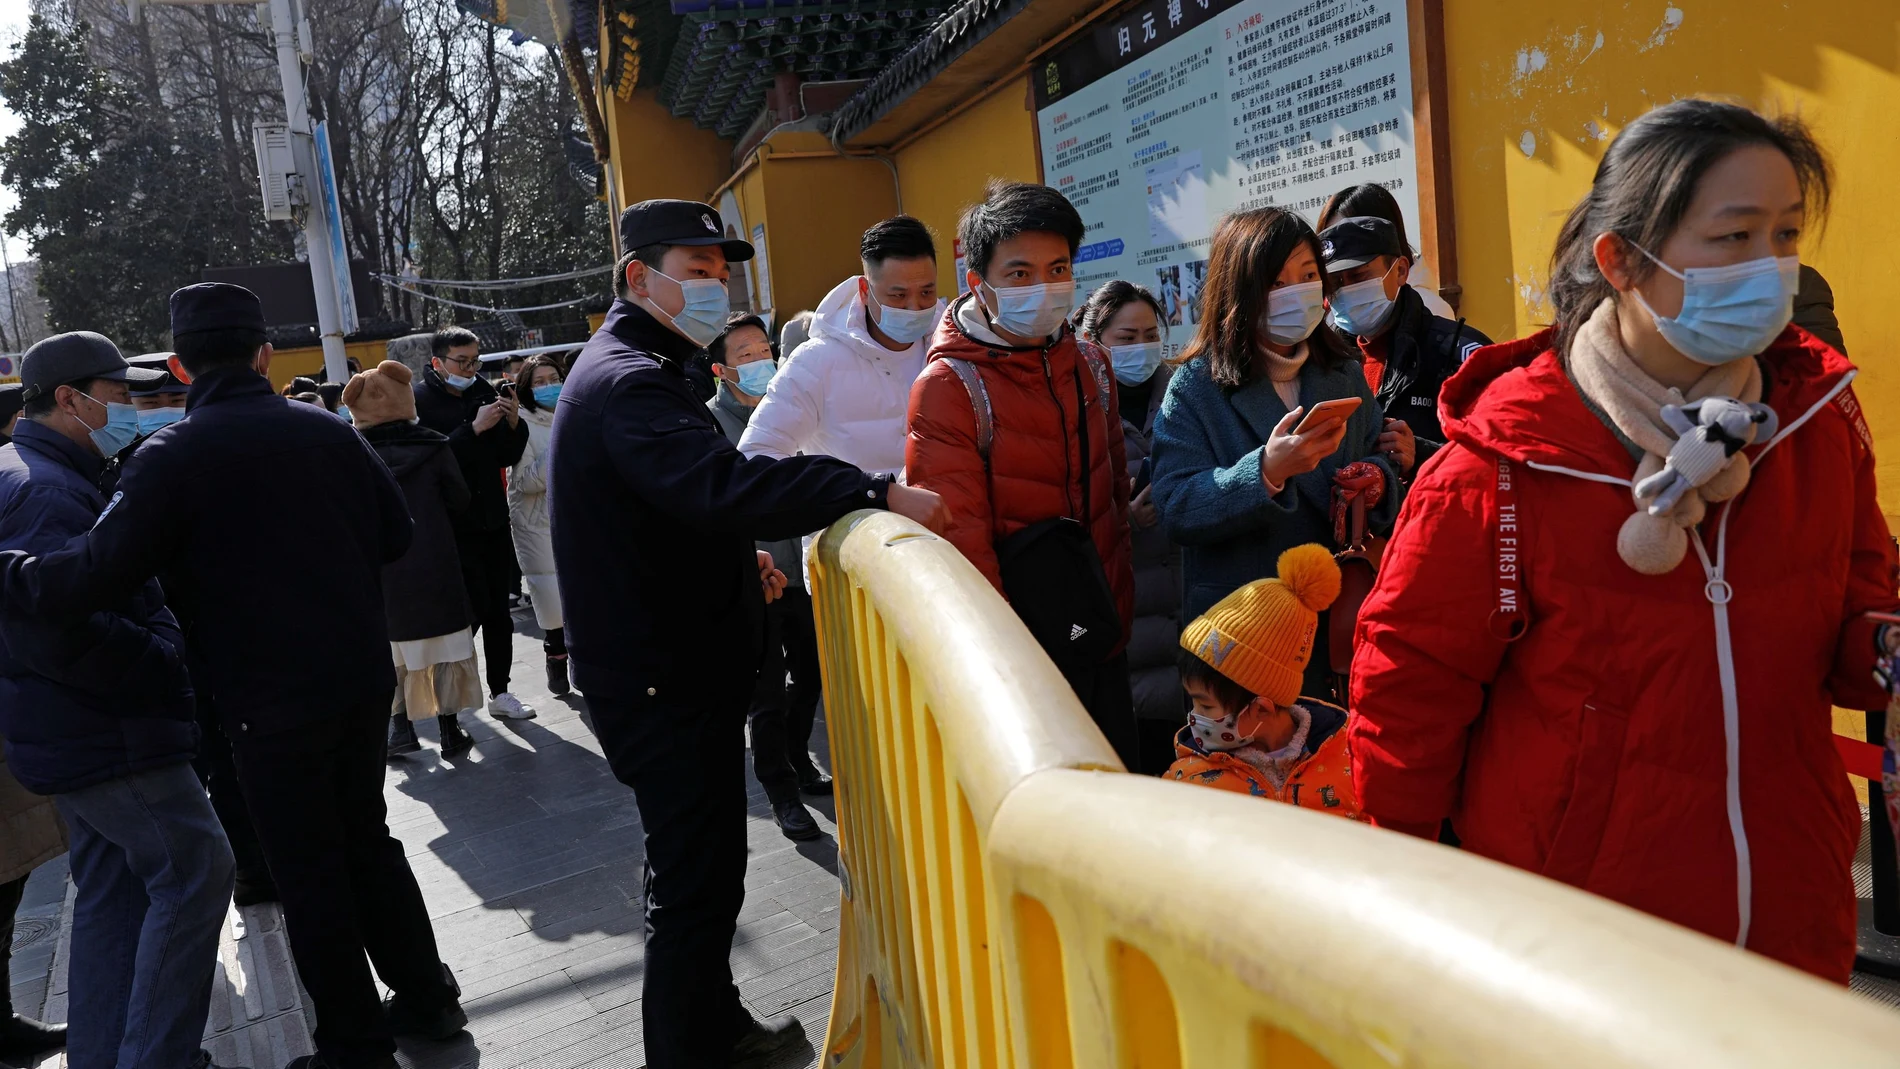 Police personnel guide the queue outside a Buddhist temple as people wearing protective face masks visit the temple on New Year?s Day, following the coronavirus disease (COVID-19) outbreak, in Wuhan, Hubei province, China January 1, 2021. REUTERS/Tingshu Wang